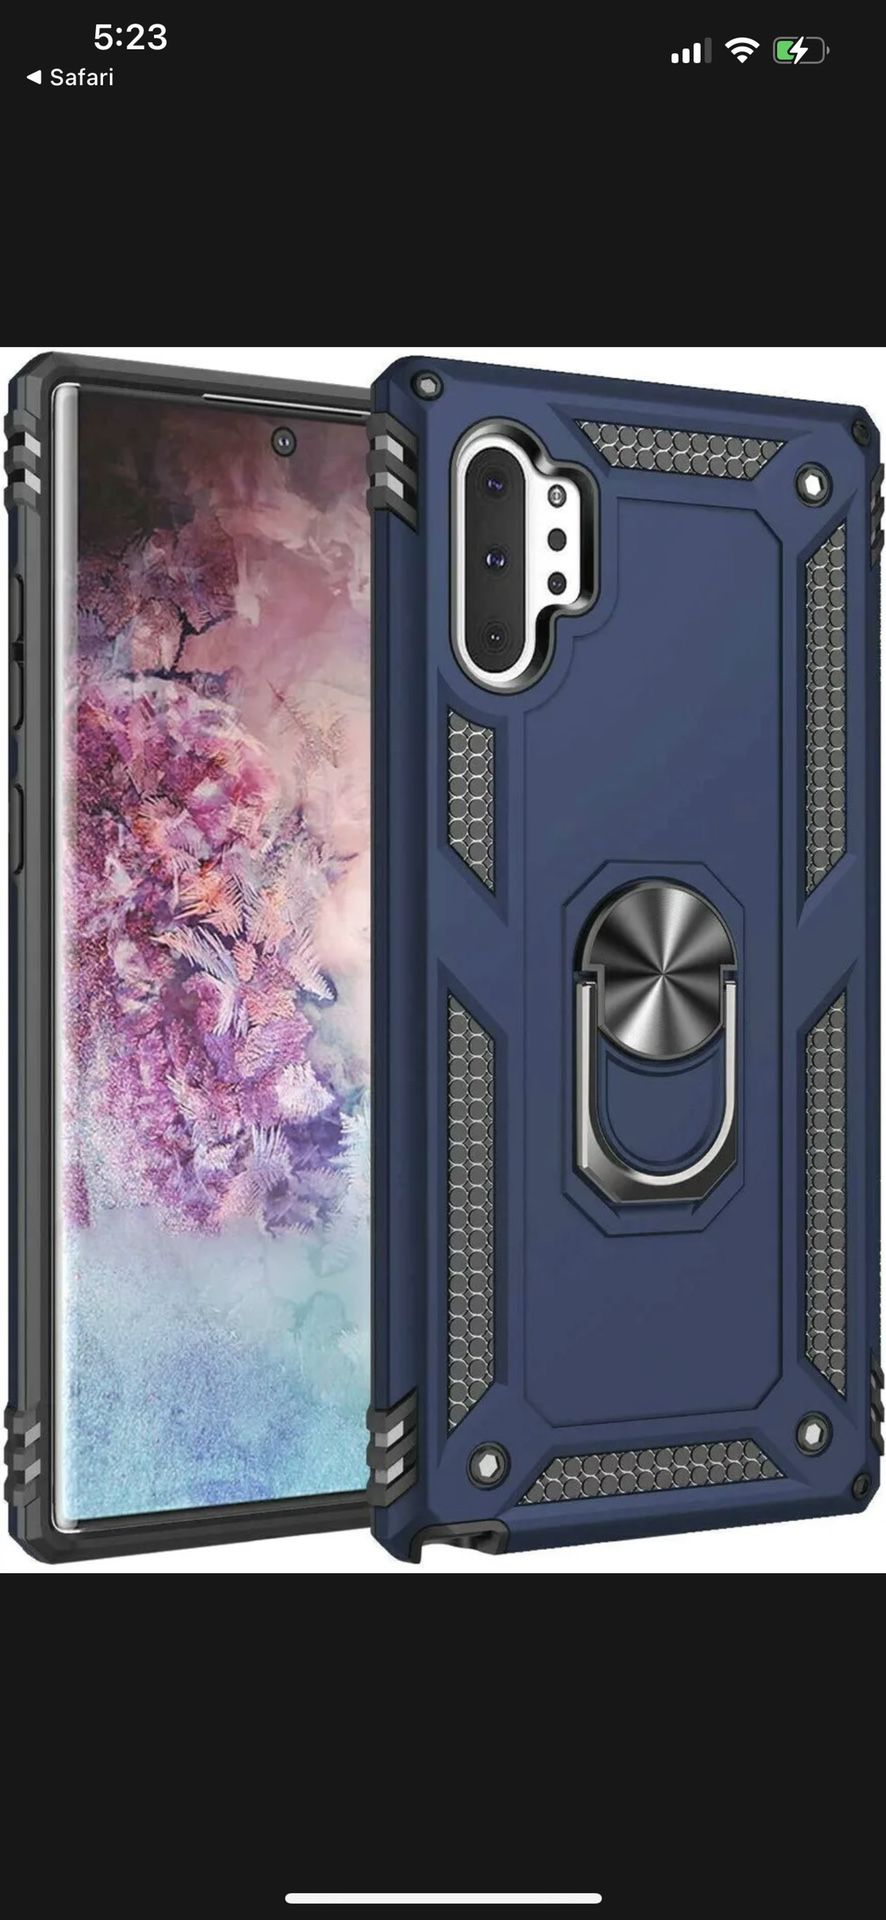 Case Protective Military case For Samsung Galaxy S10 Plus,Samsung Note 10 Plus 